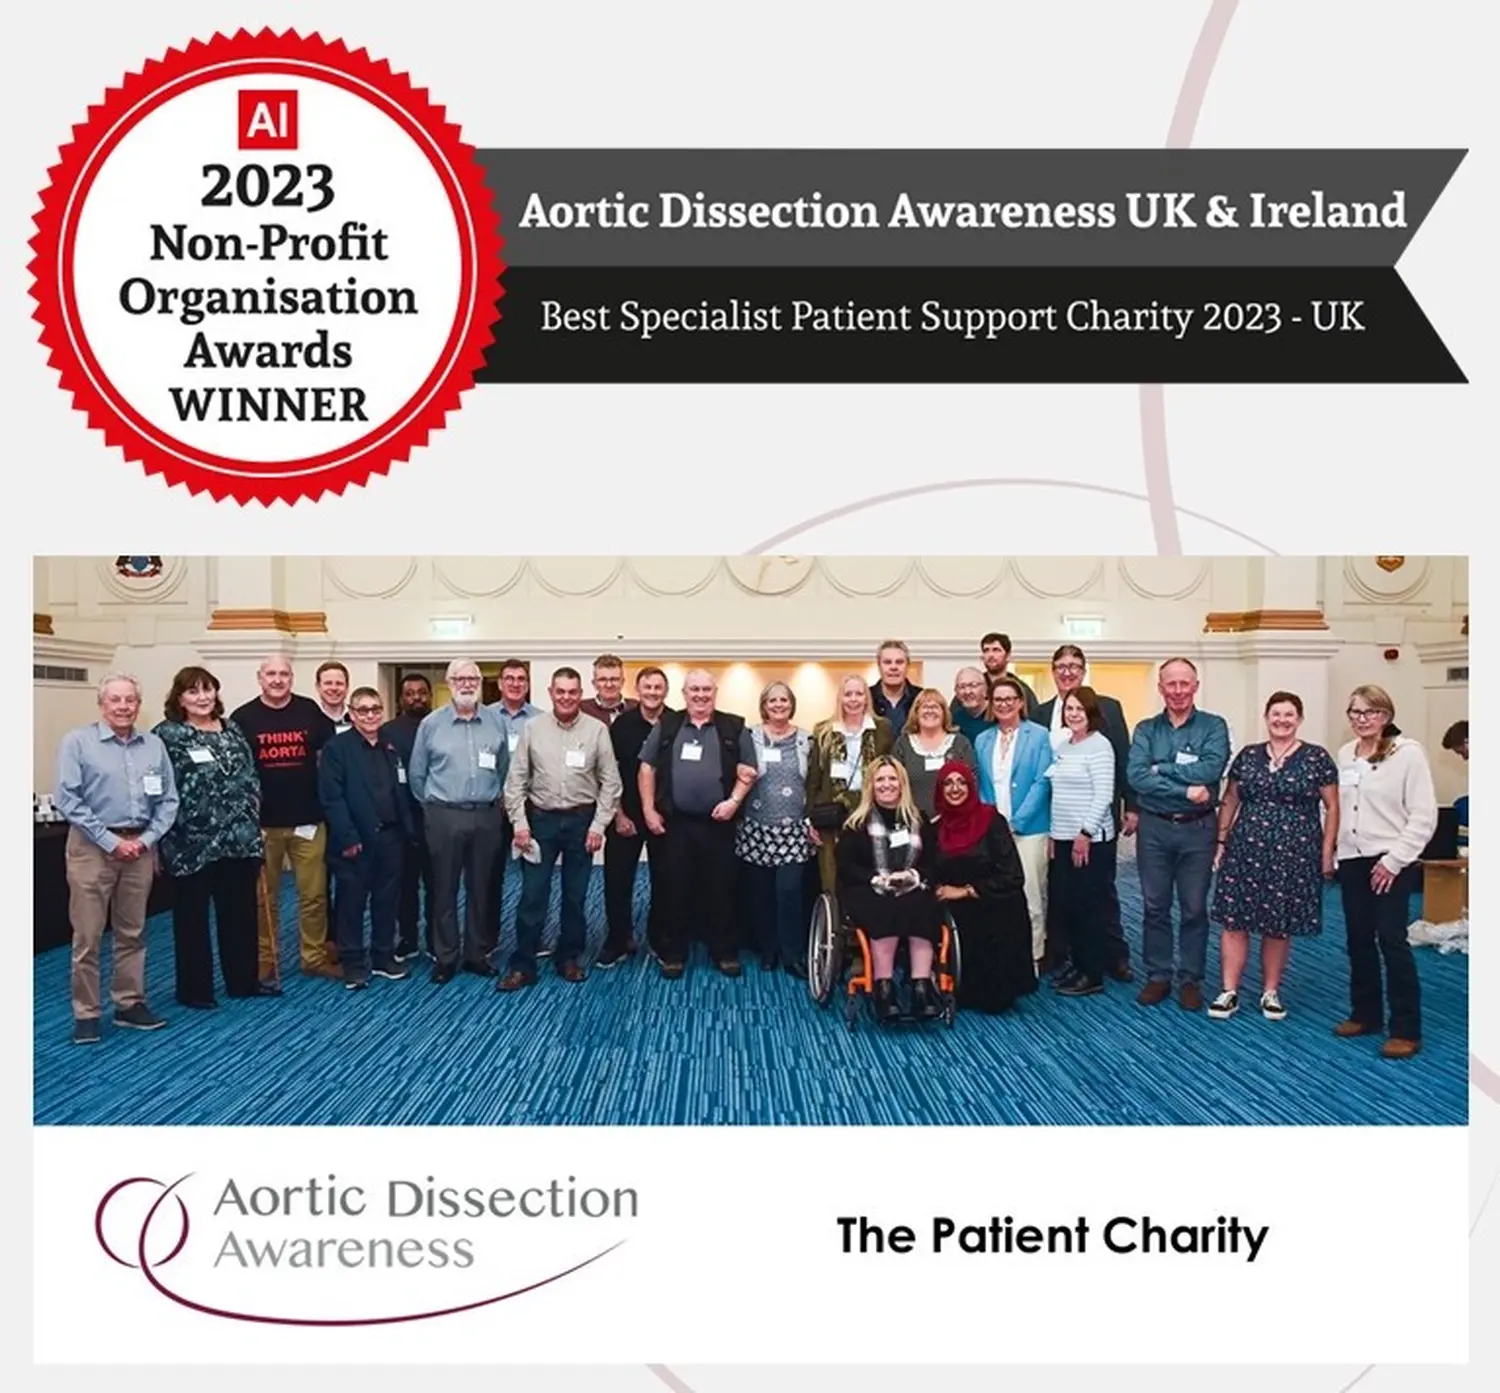 Award-winning patient charity launches new Aortic Dissection website